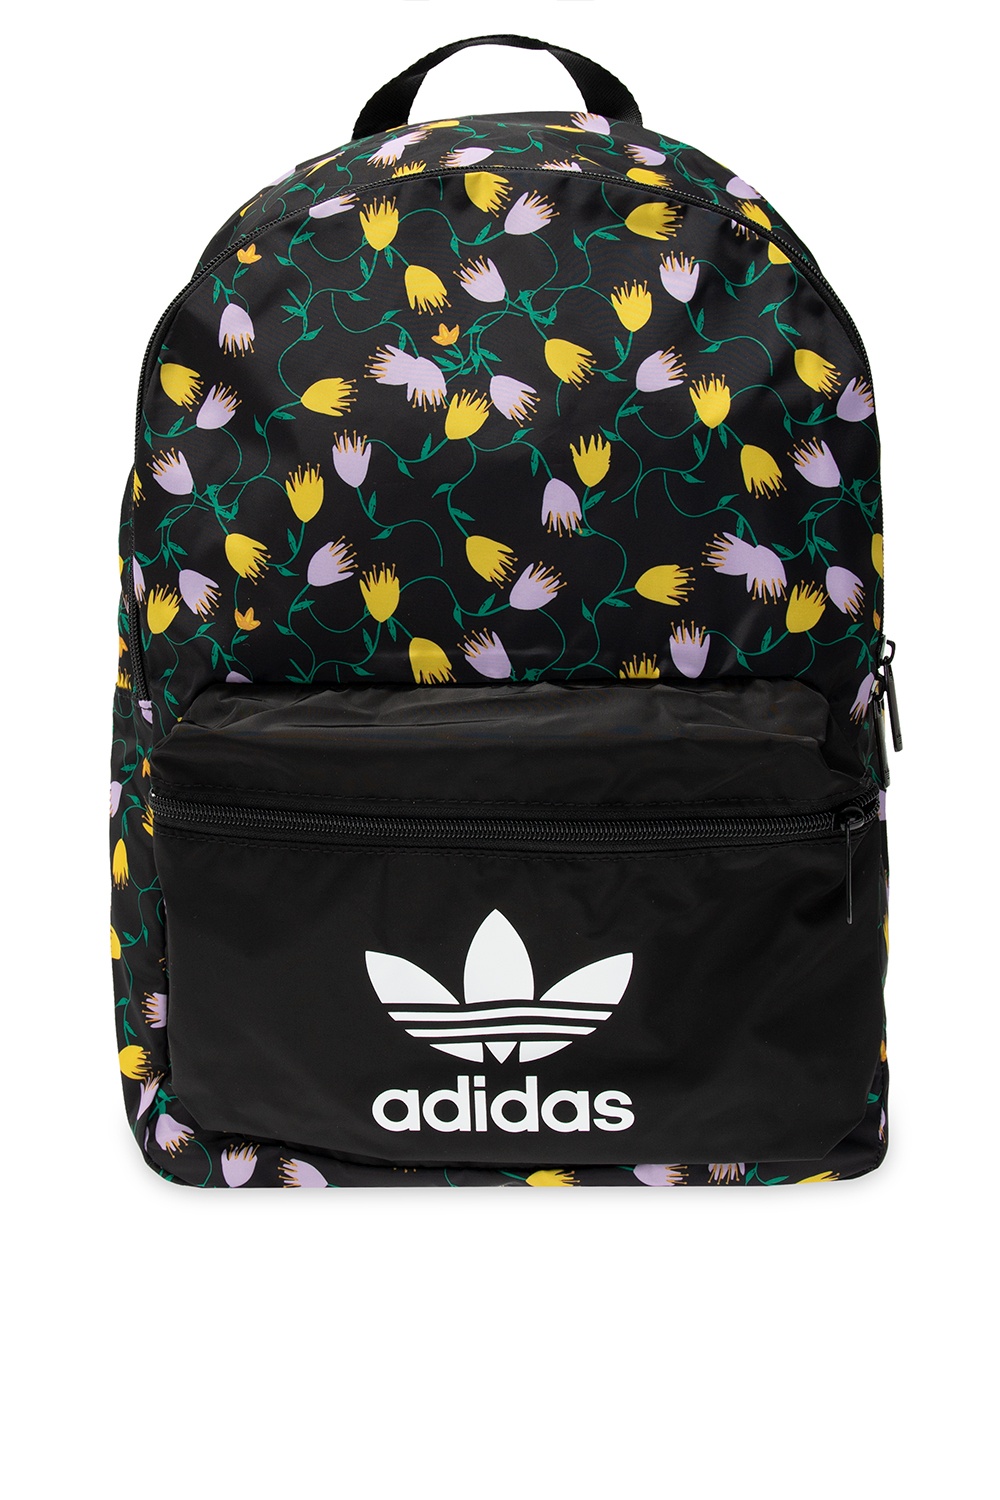 adidas patterned backpack